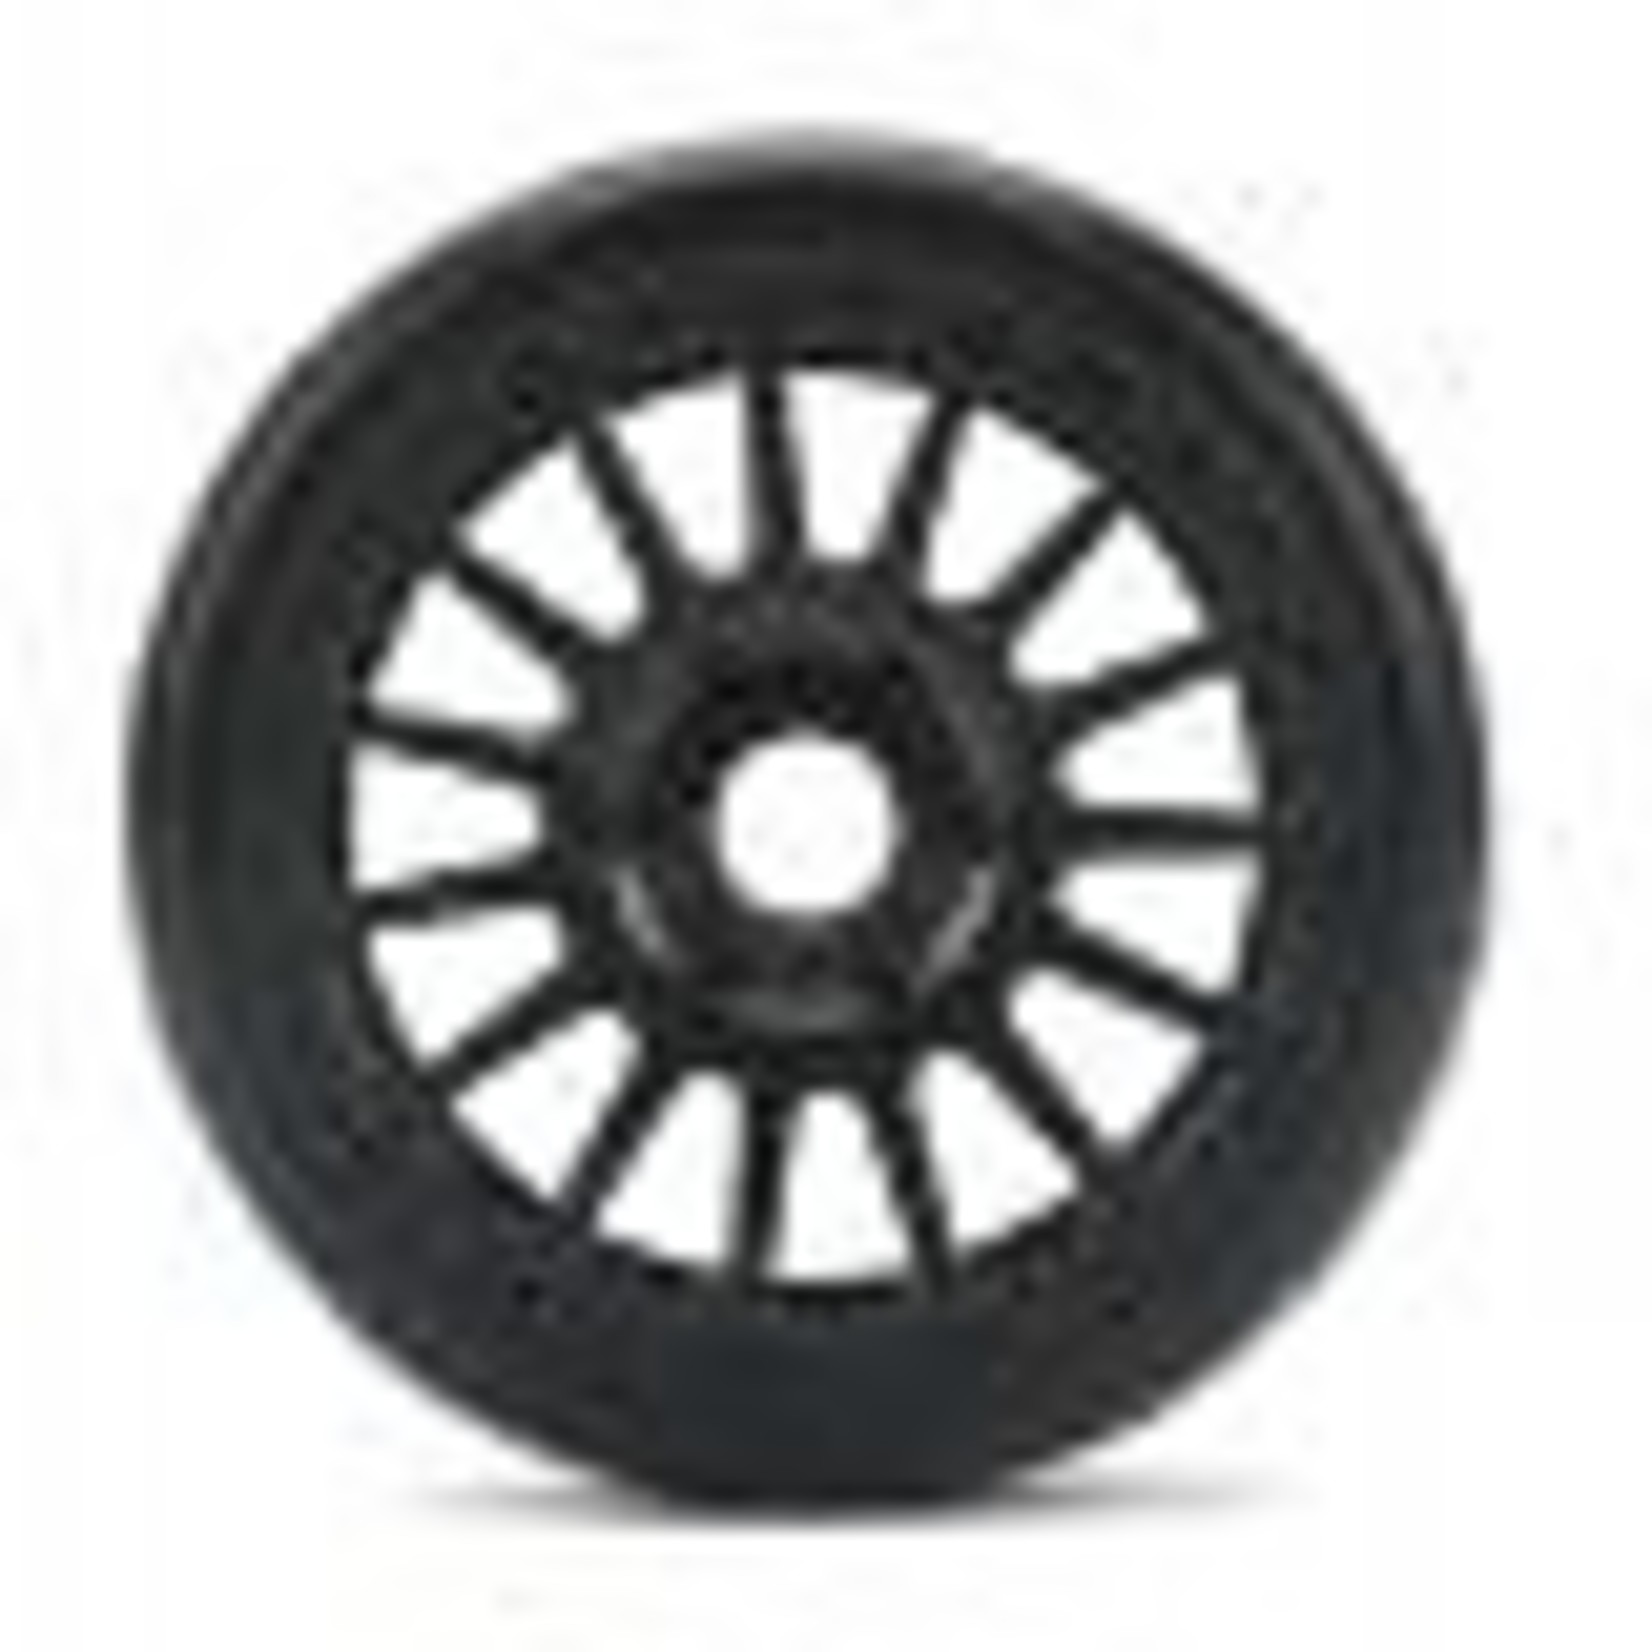 Powerhobby PHT2404-M  Powerhobby 1/8 GT Atomic Belted Pre-Mounted Tires 17mm Medium Compound